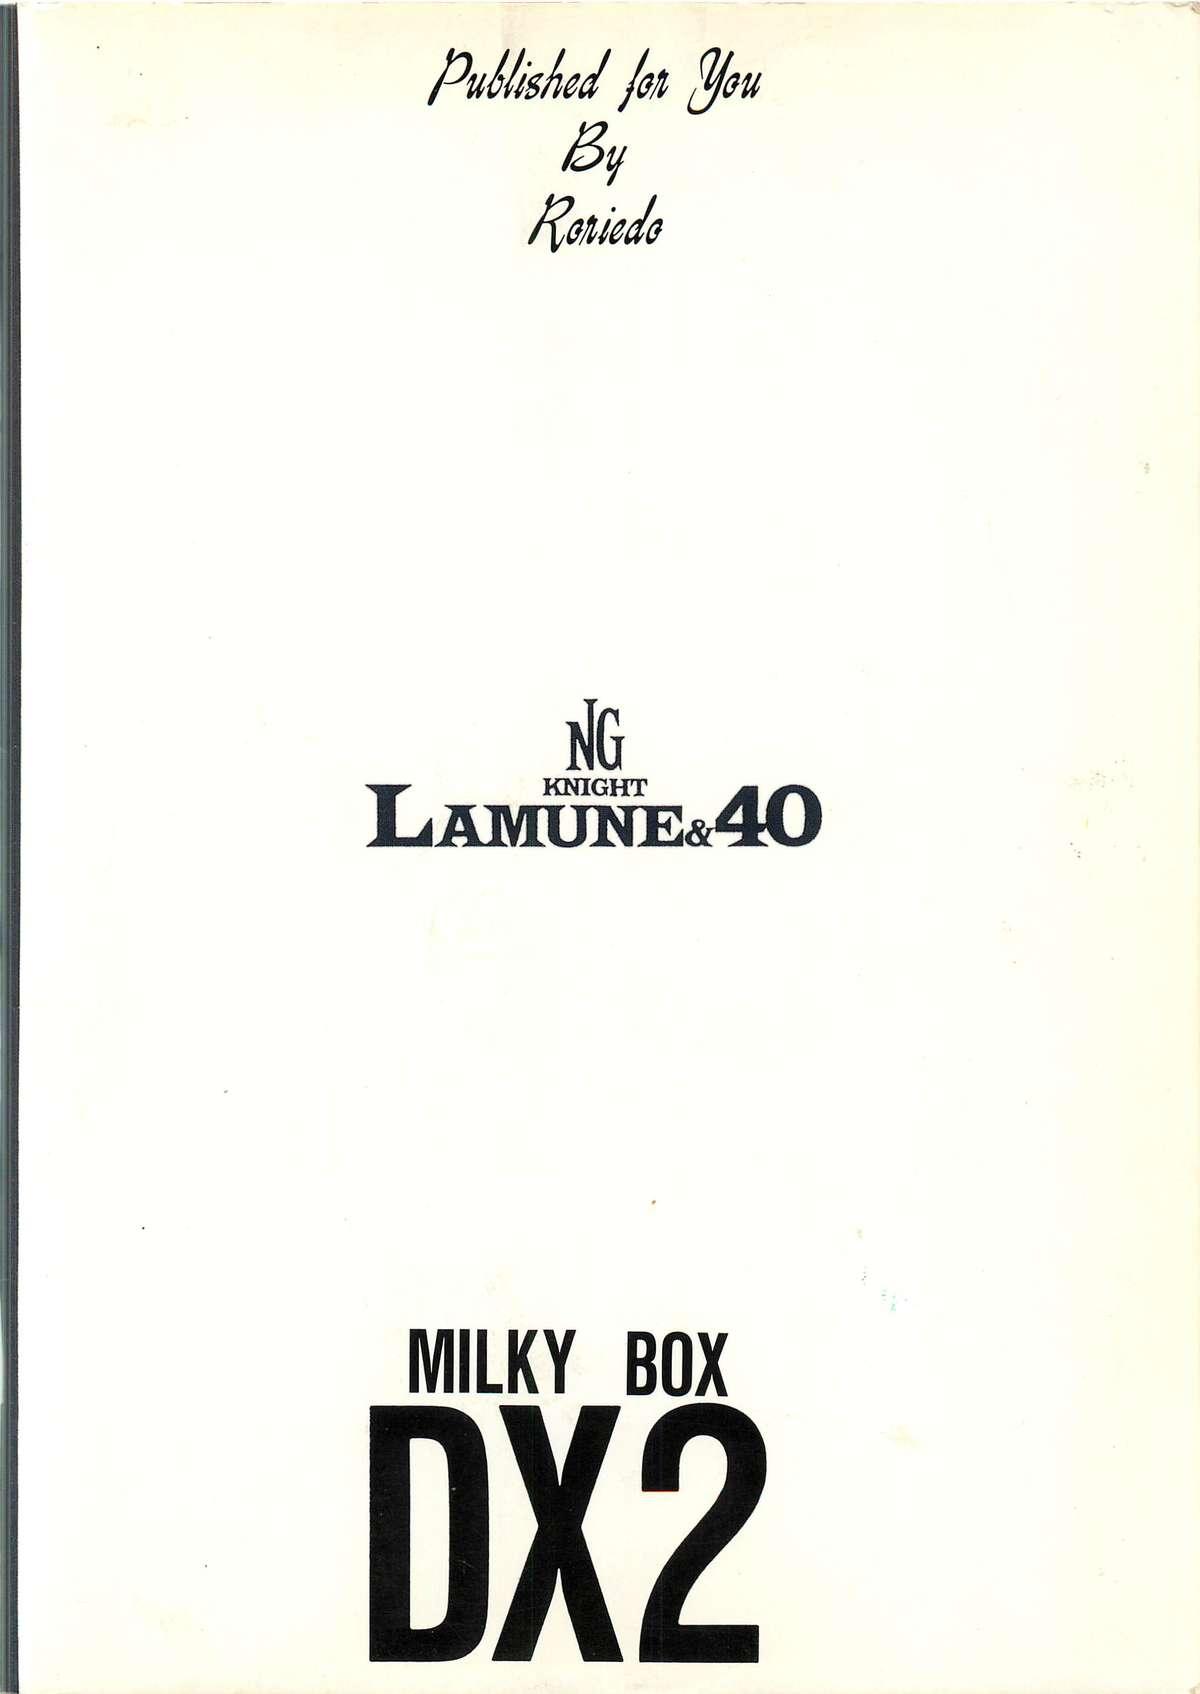 Pene MILKY BOX DX2 - Ng knight lamune and 40 Indian - Page 73